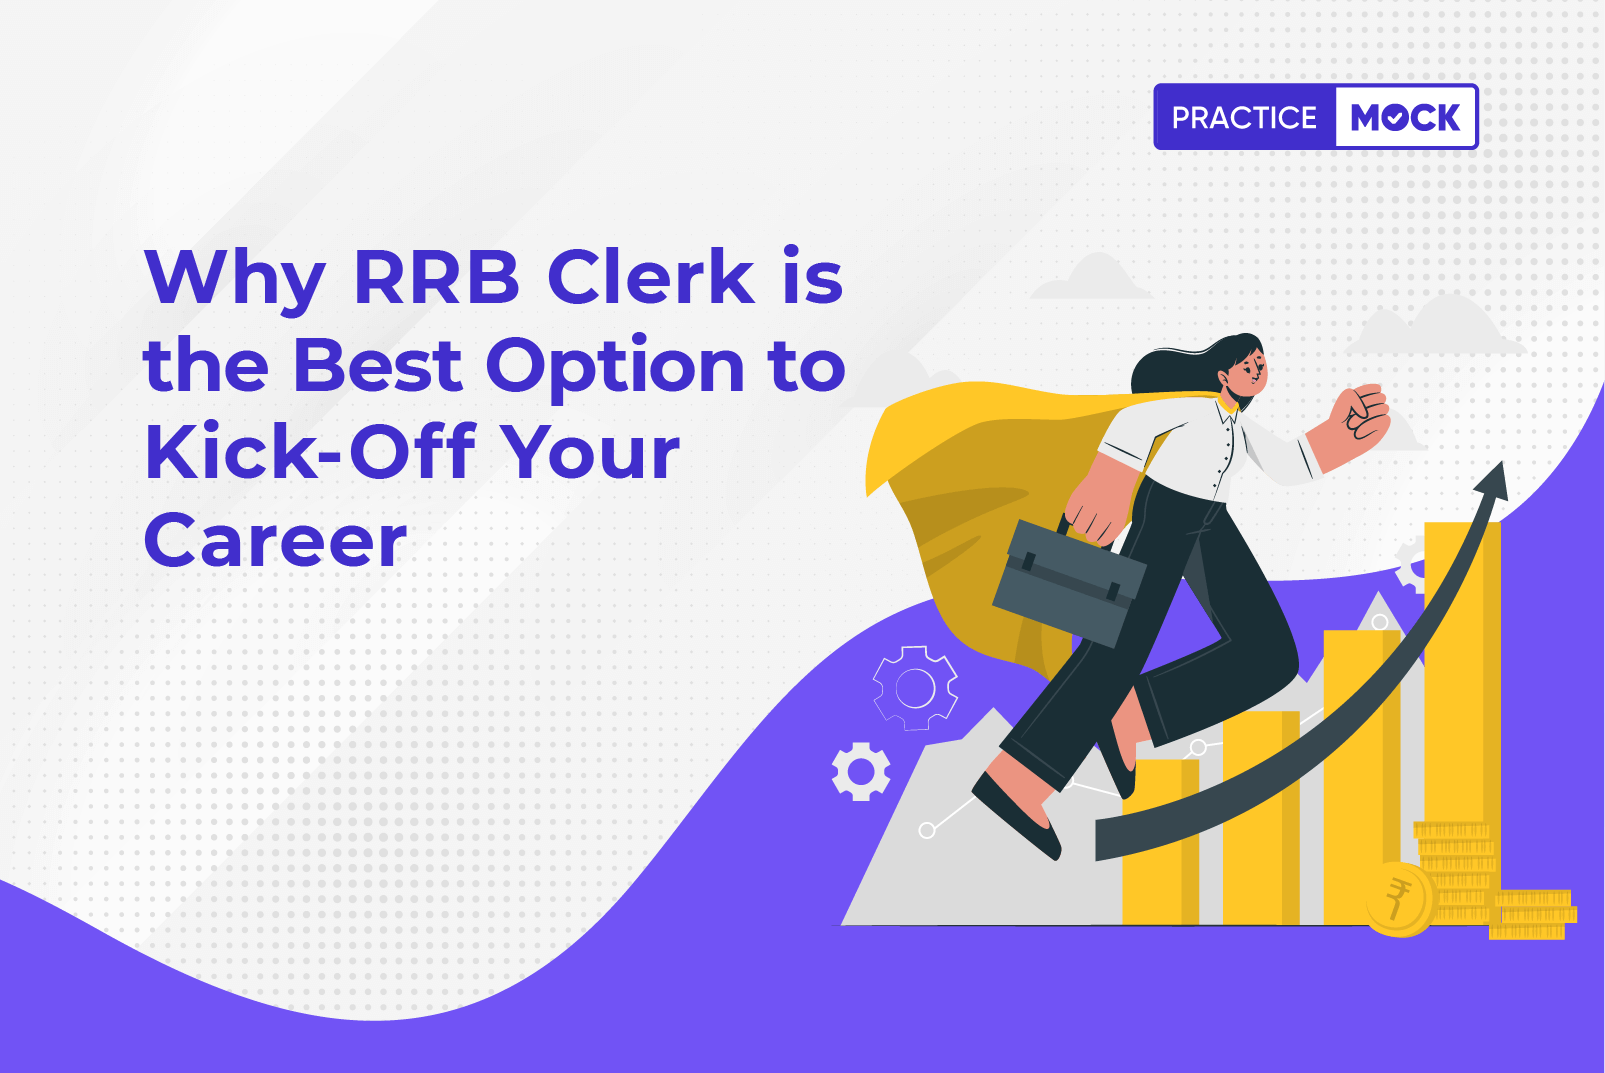 Why RRB Clerk is the Best Option to Kick Off Your Career